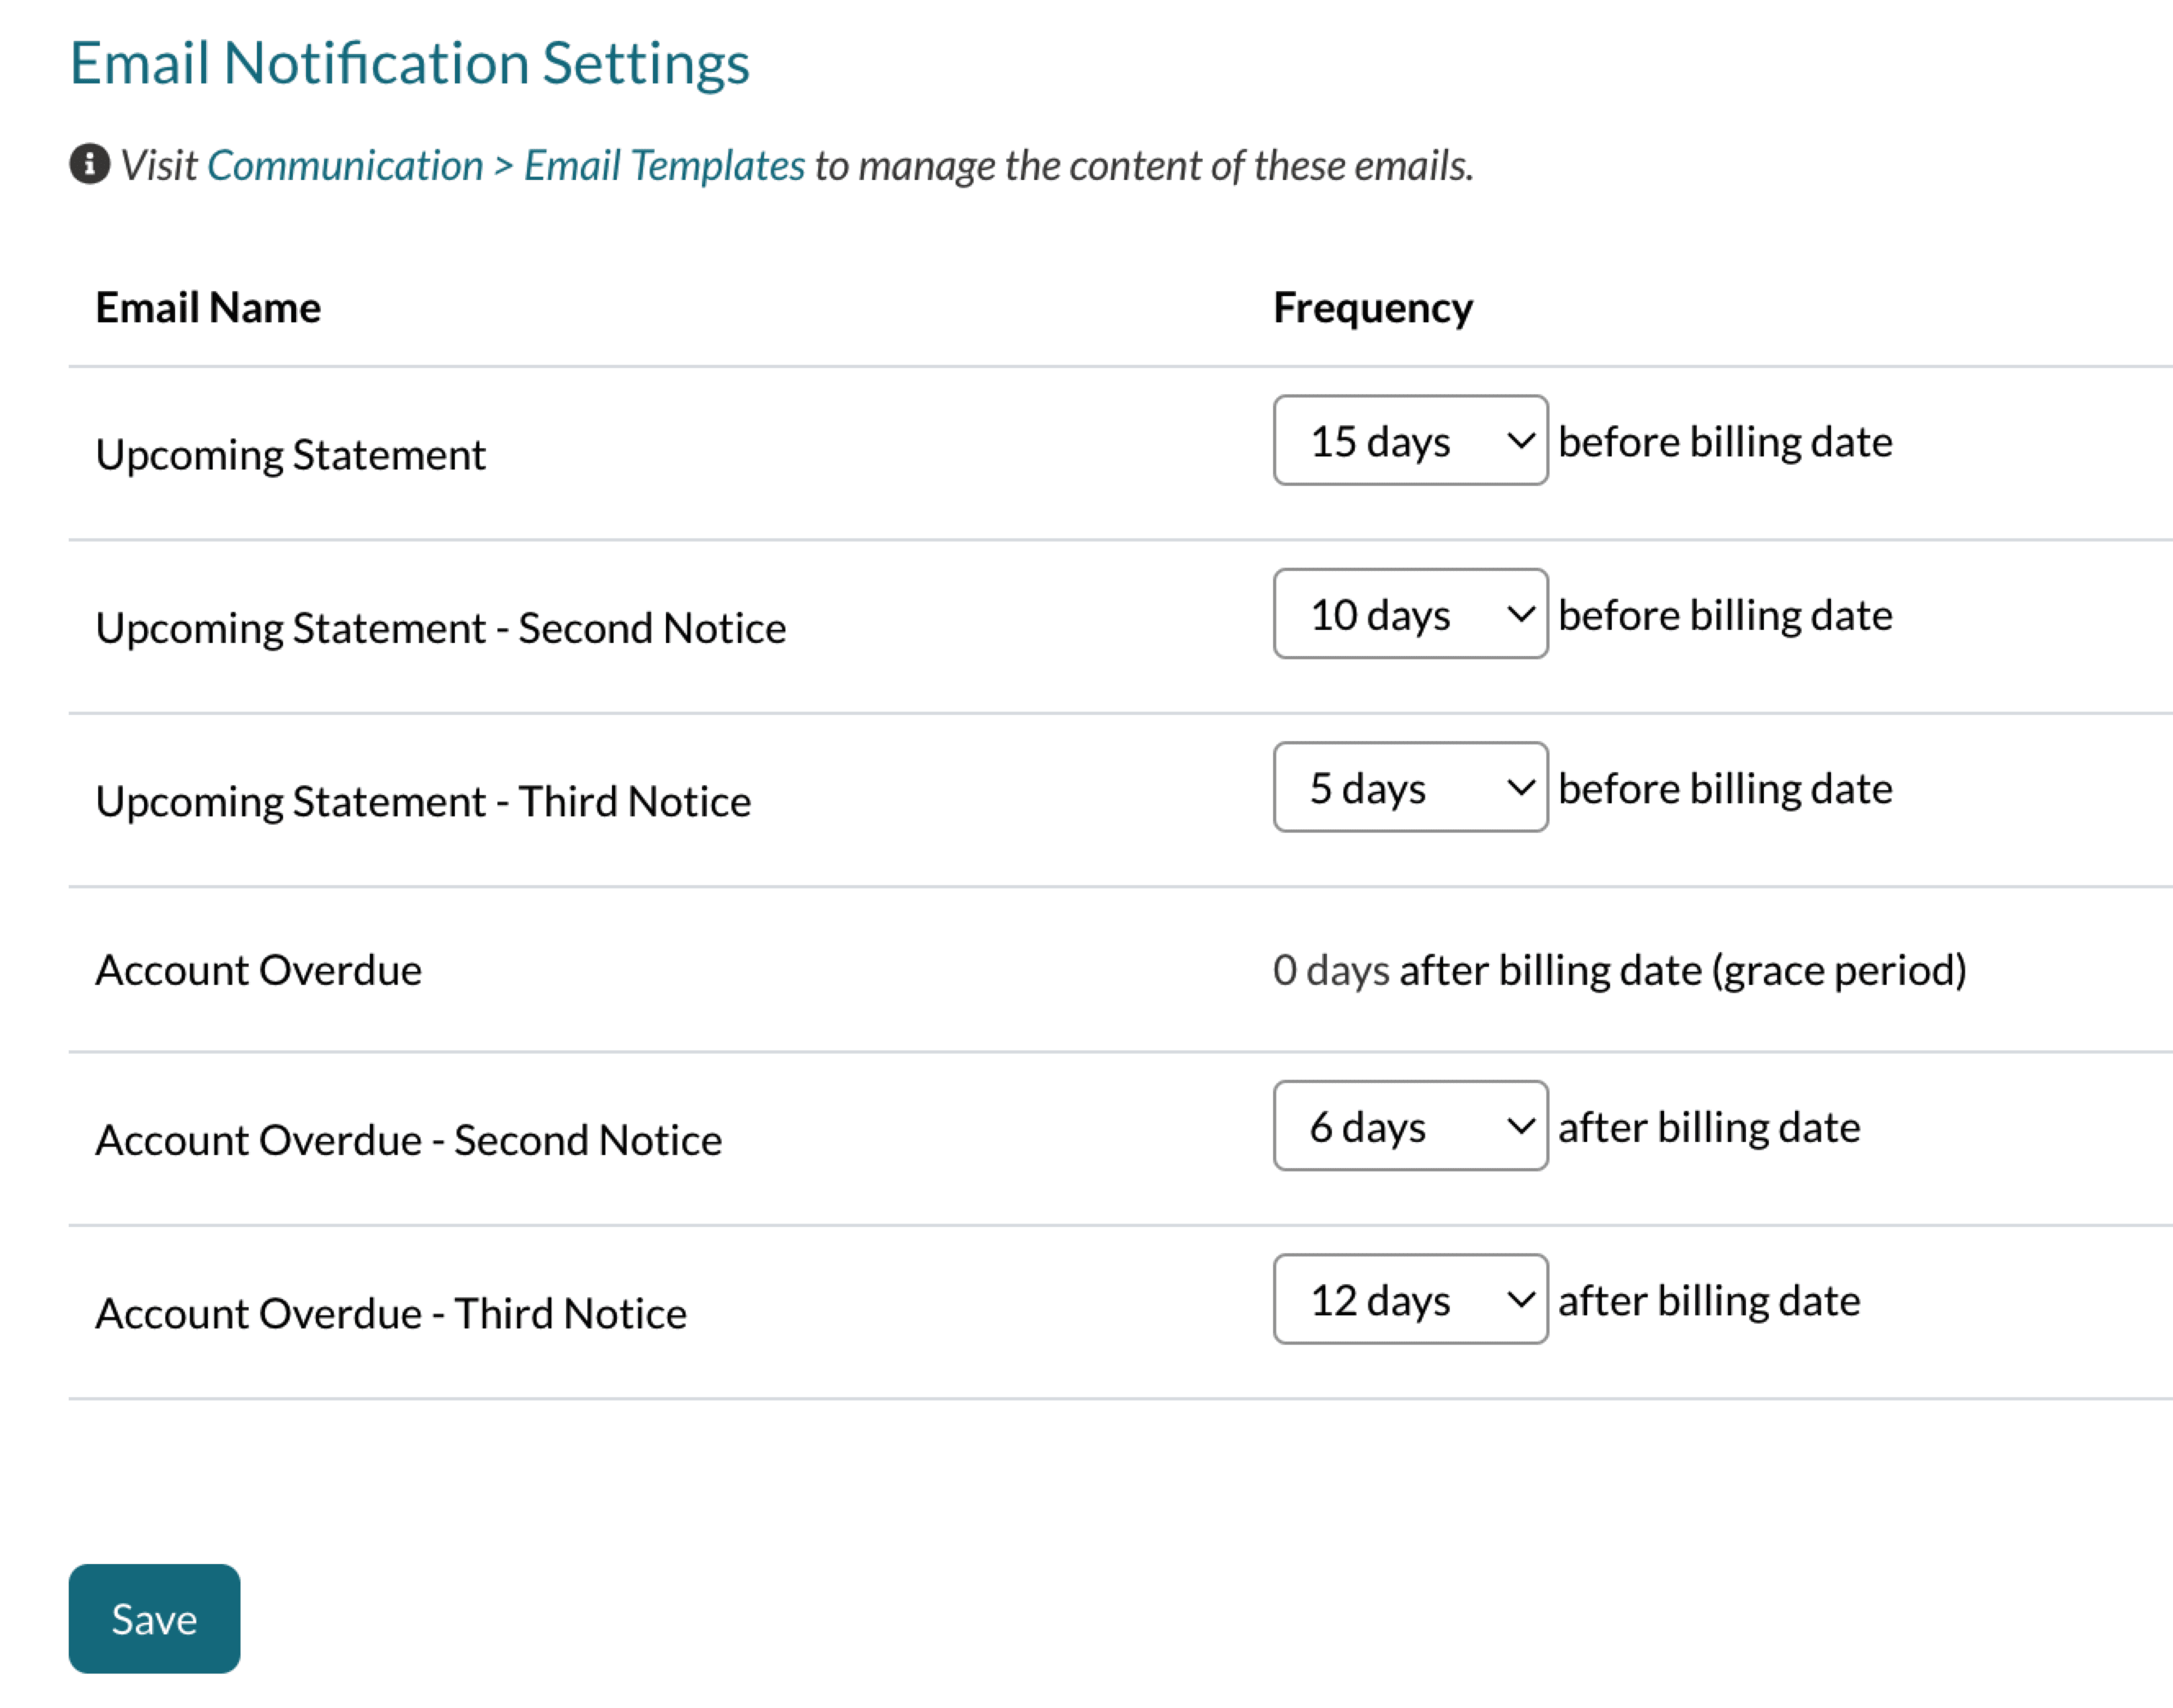 Email Notification Settings in the Billing Setup Page